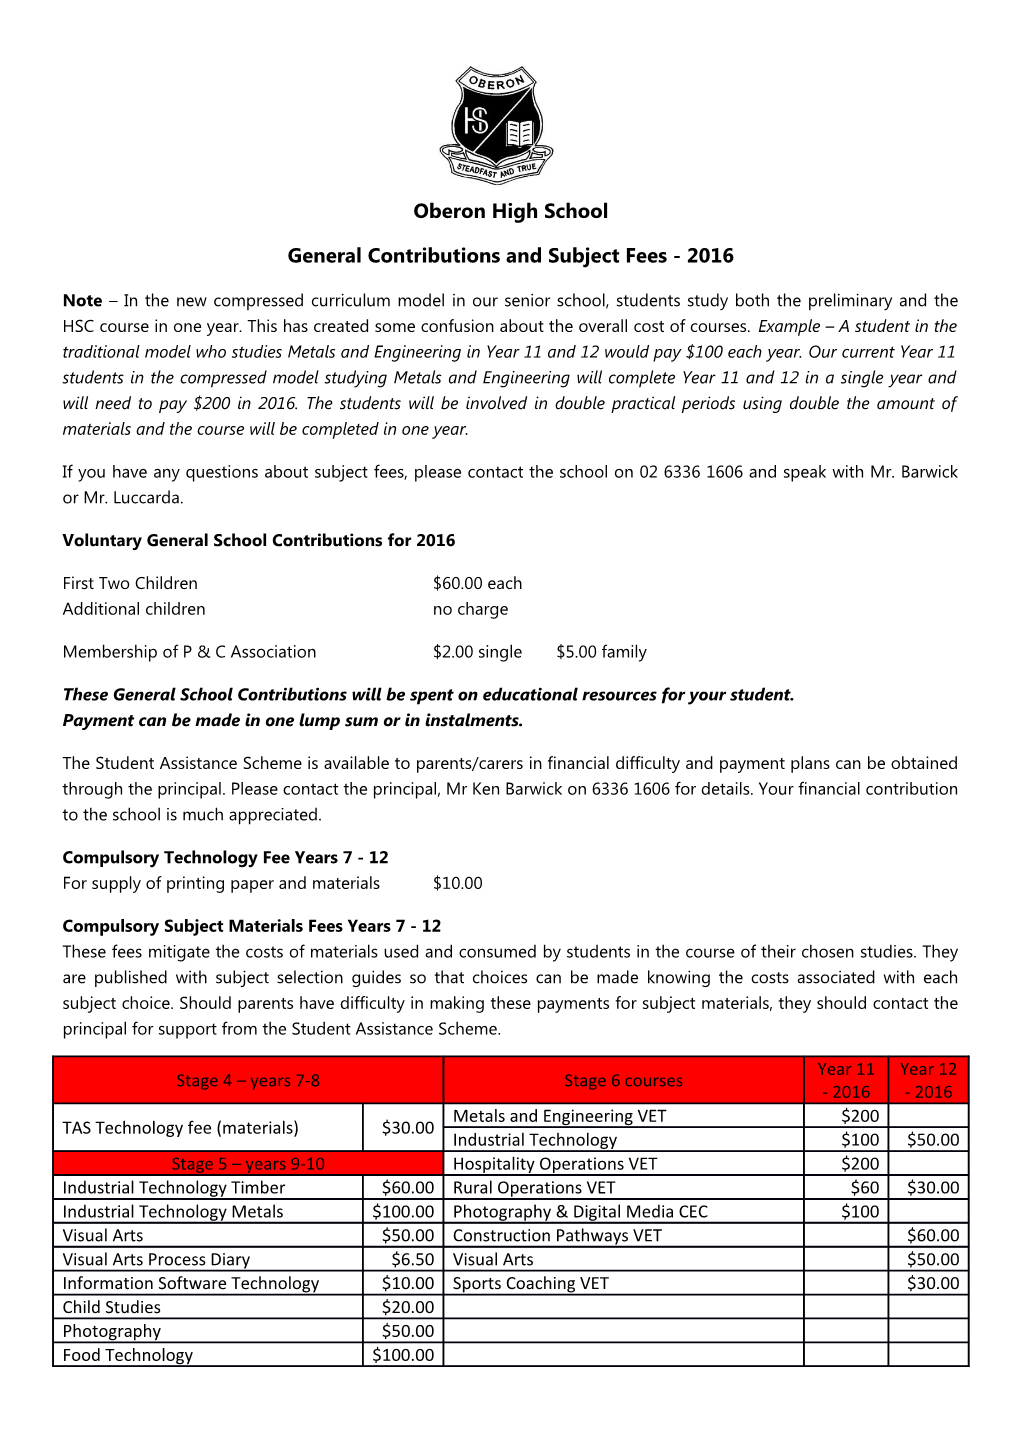 General Contributions and Subject Fees - 2016